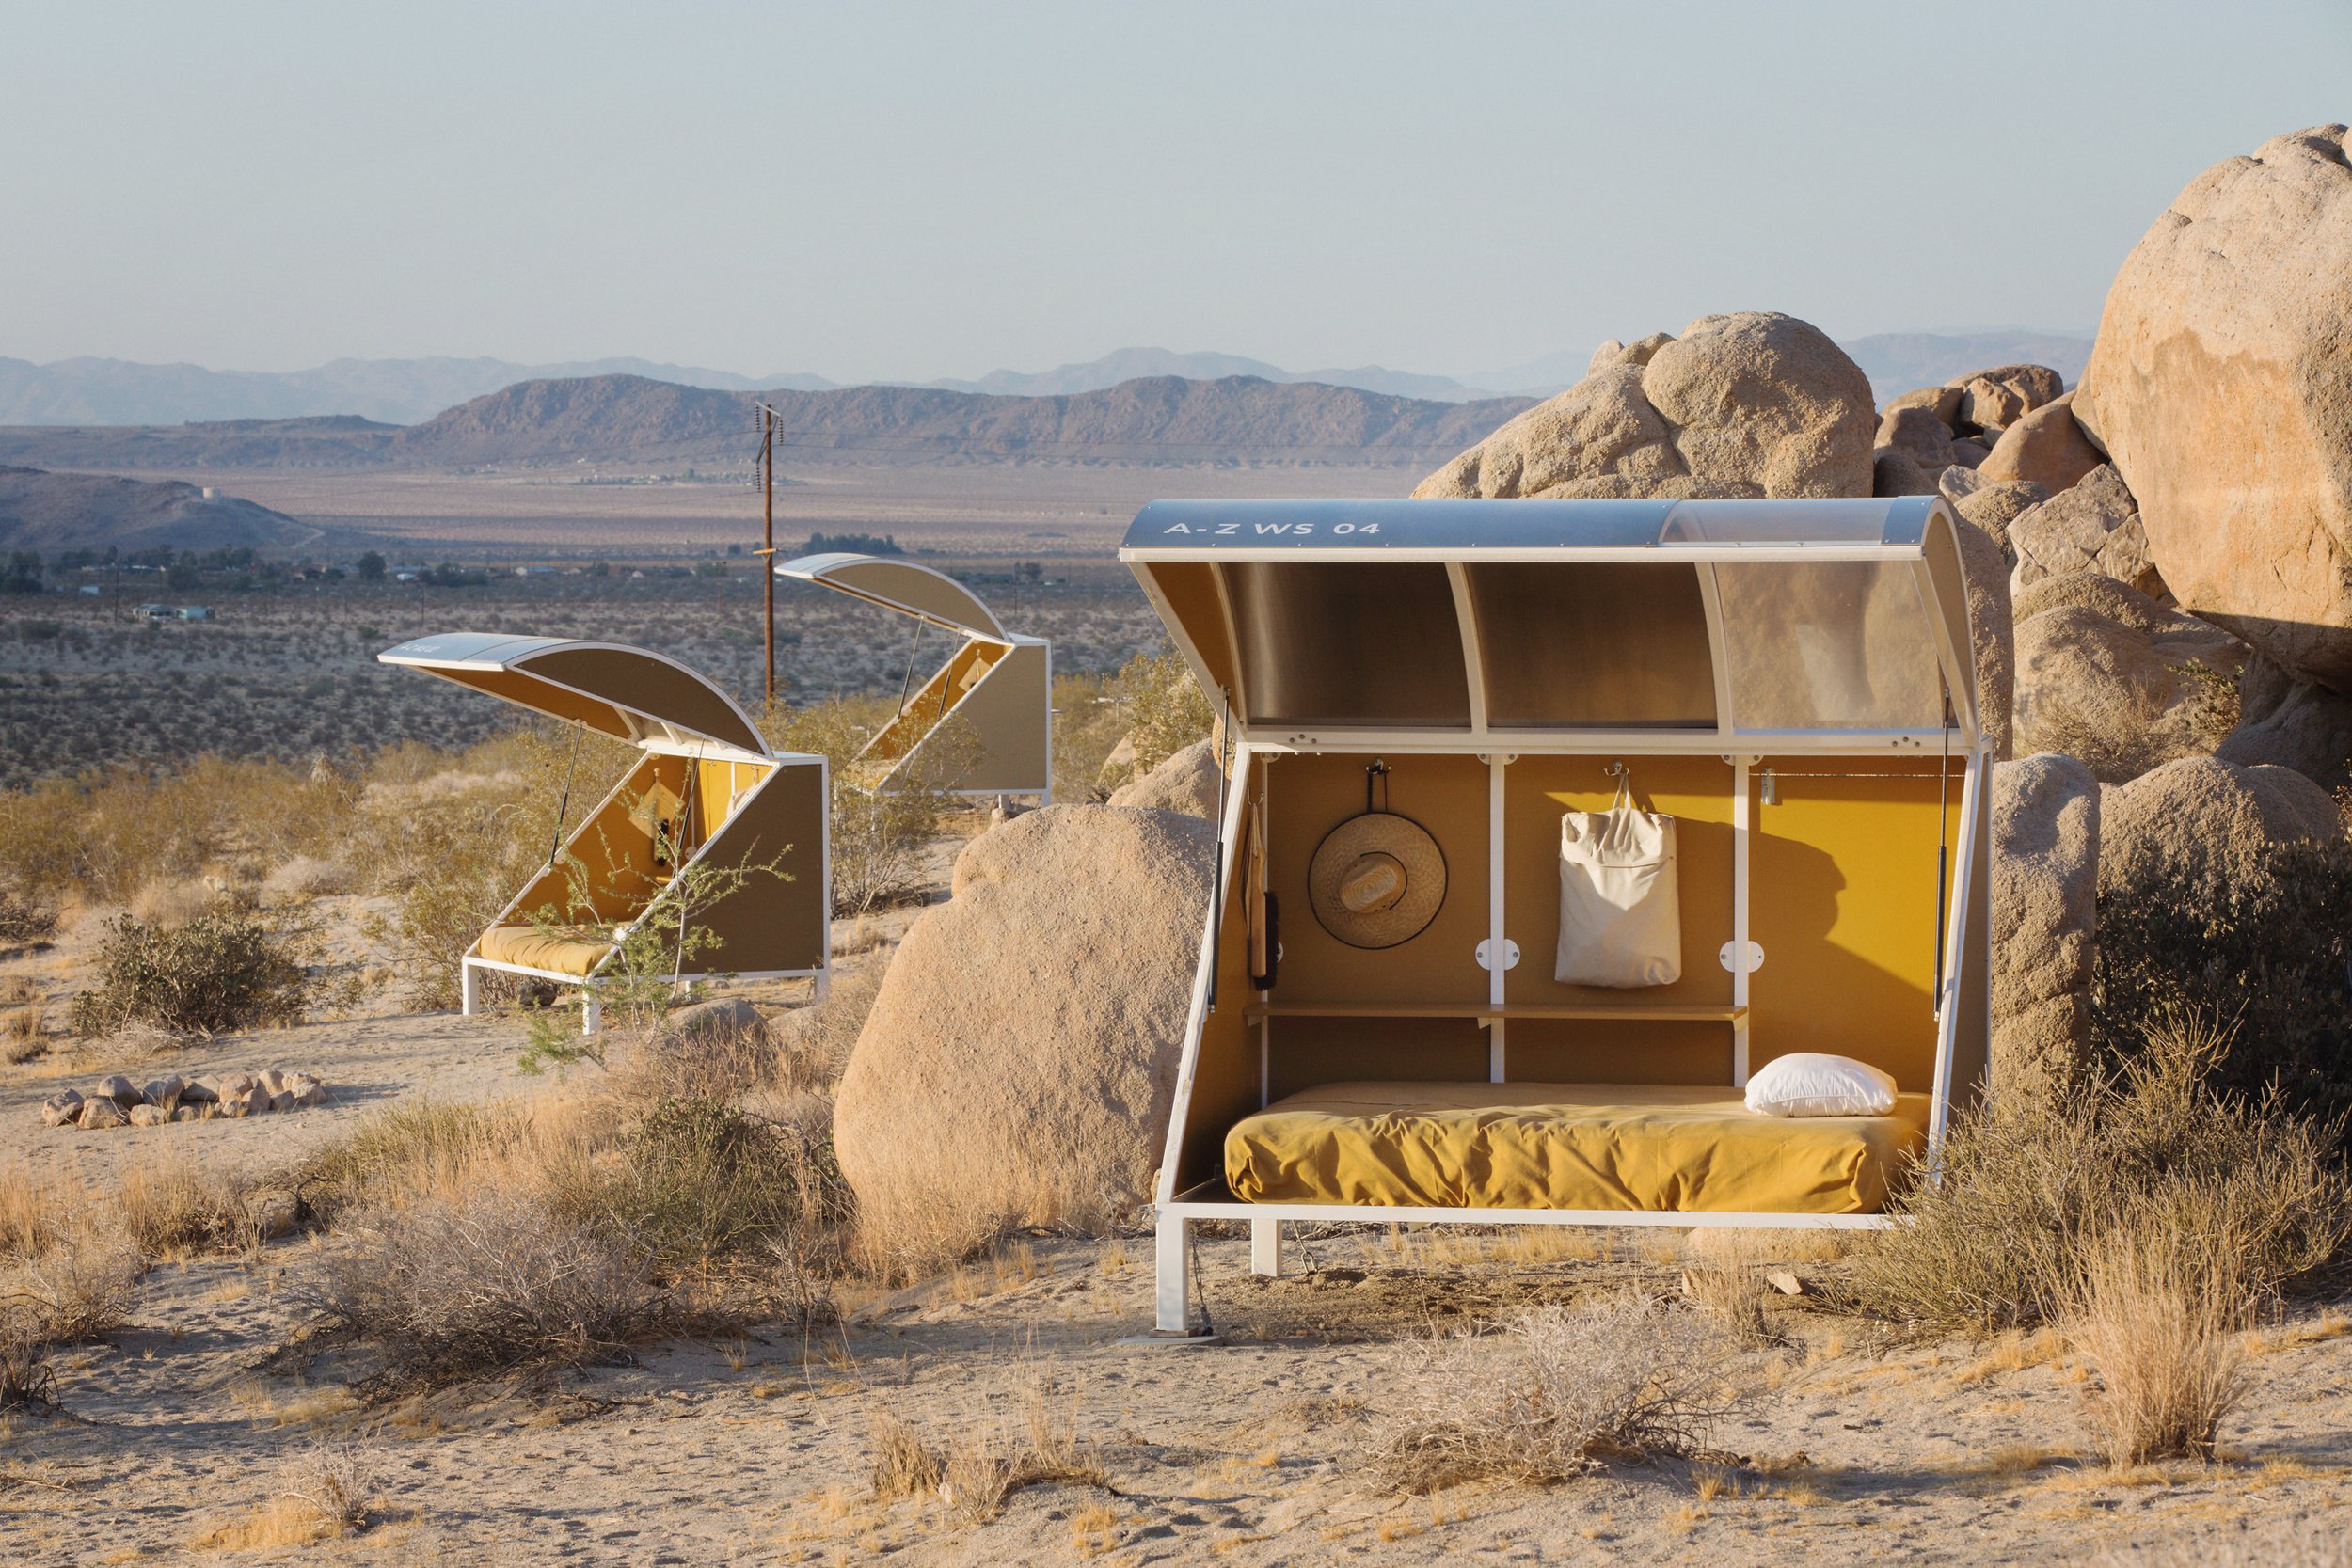   Wagon Station Encampment, A-Z West , 2015 Photo: Lance Brewer, Courtesy the artist and Regen Projects, Los Angeles 